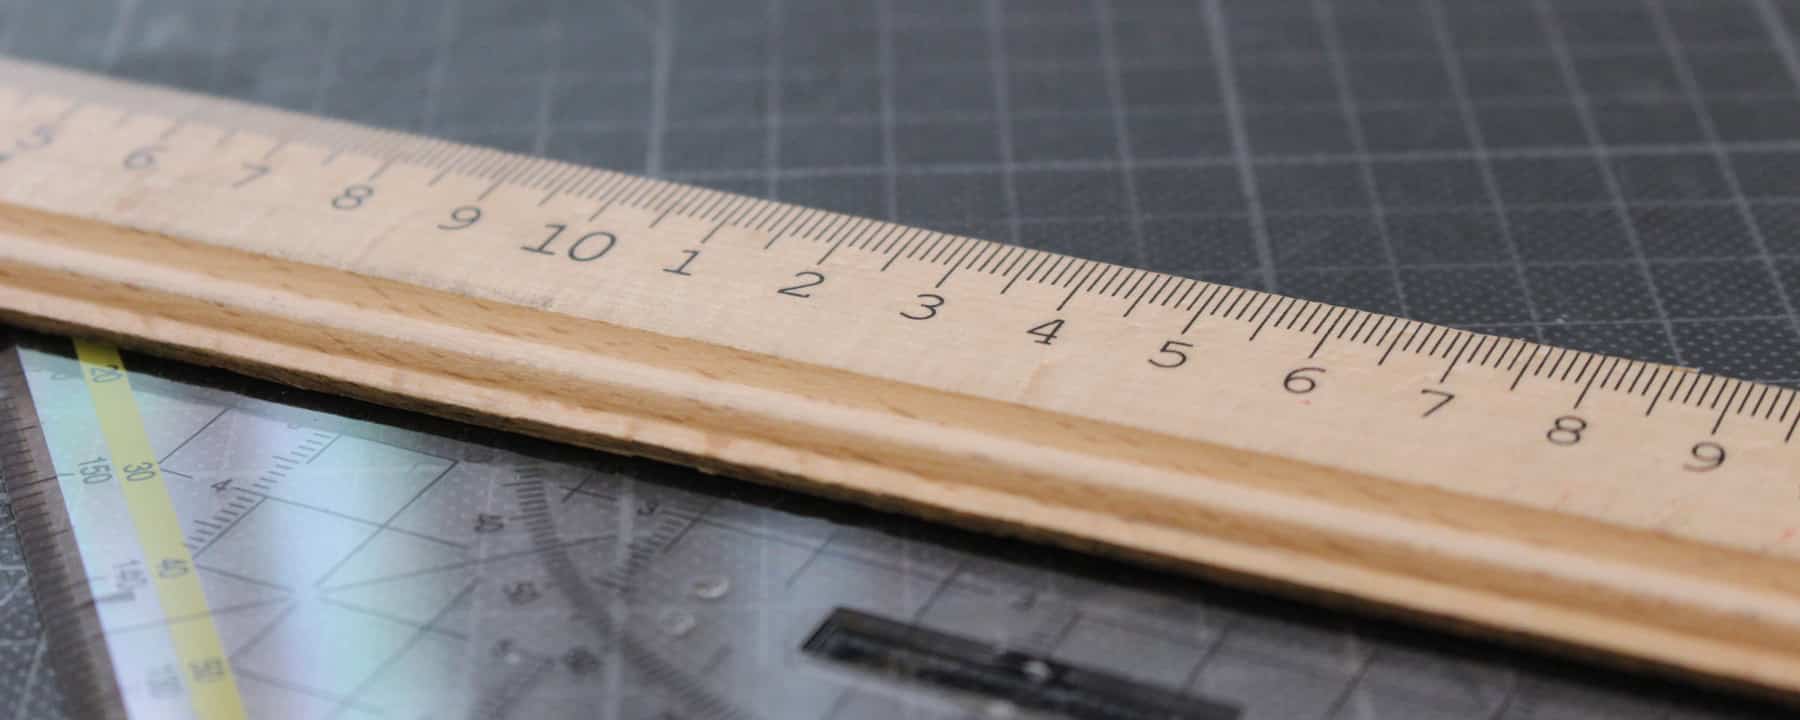 Ruler and set square - symbolic image for social media image sizes and video resolutions